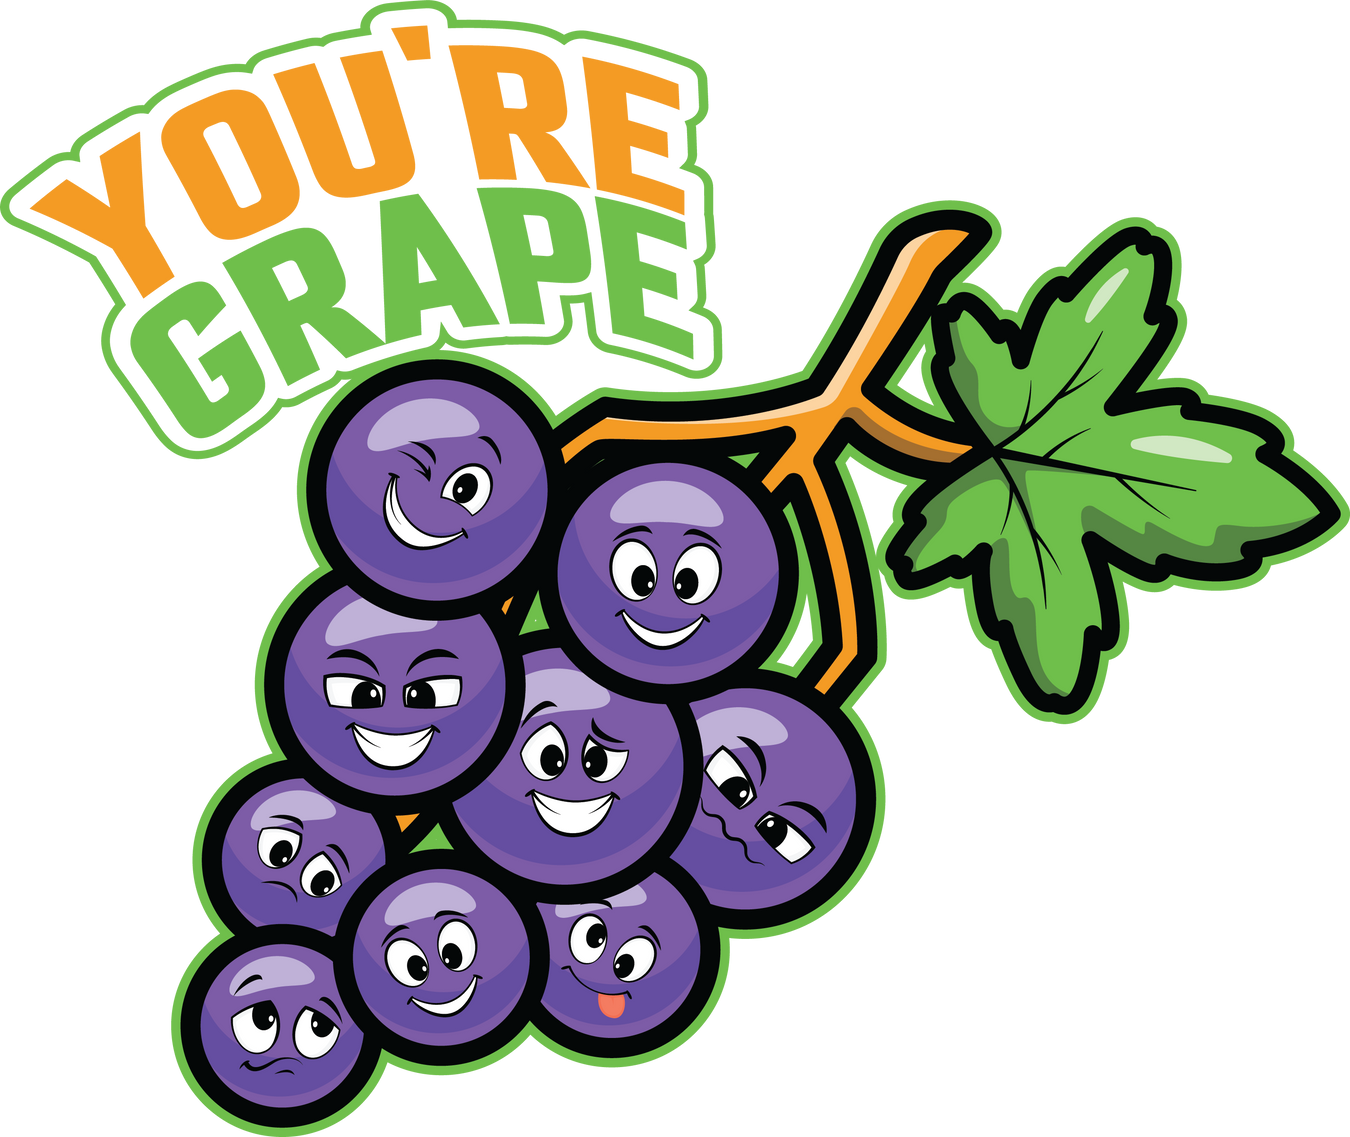 Collection-You're Grape